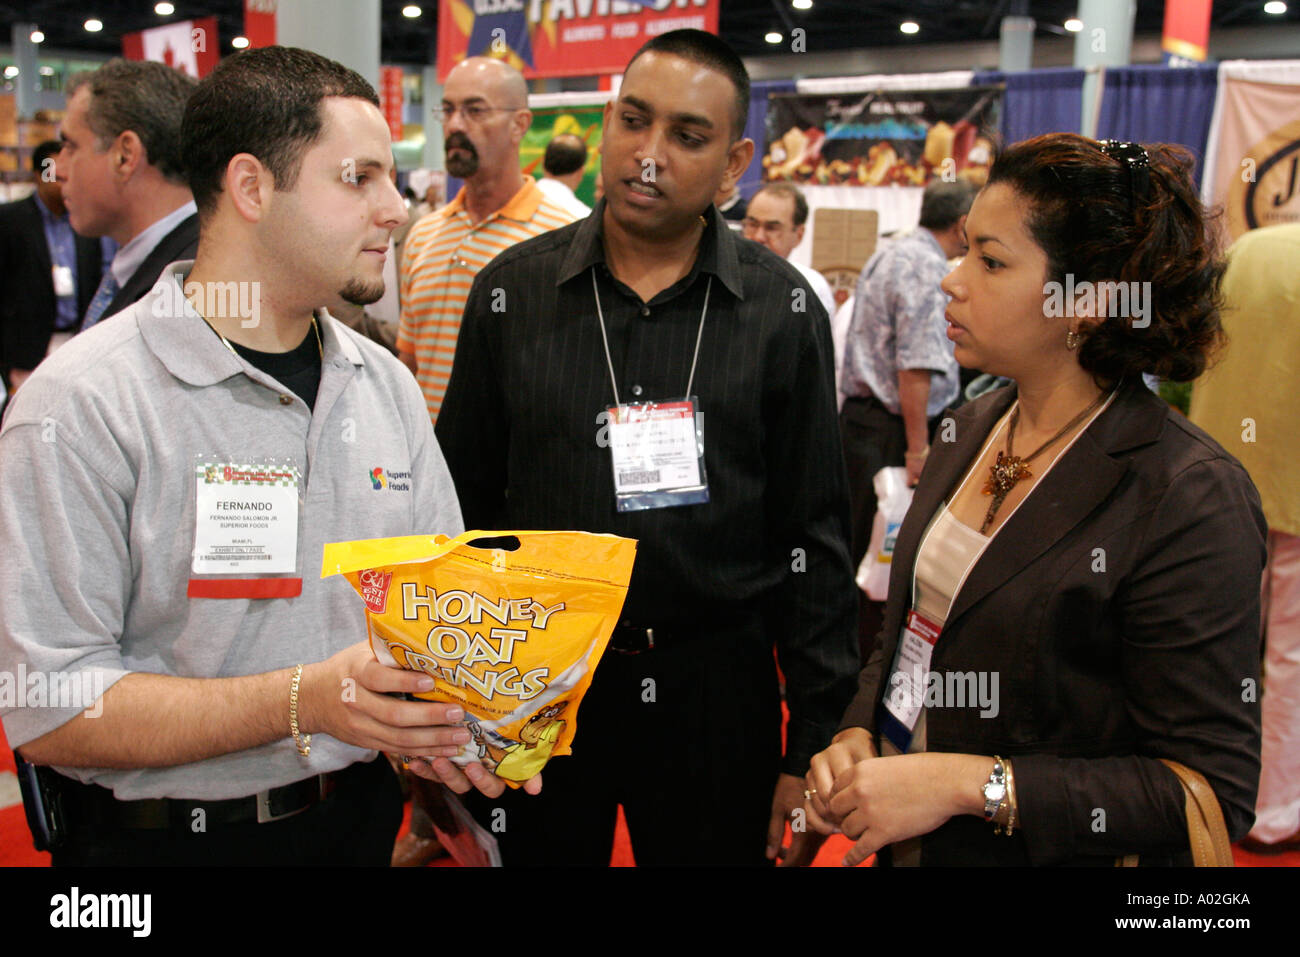 Miami Beach Florida,Convention Center,centre,Americas Food and Beverage Show,trade,product product products display sale,import,export,White man,Asian Stock Photo